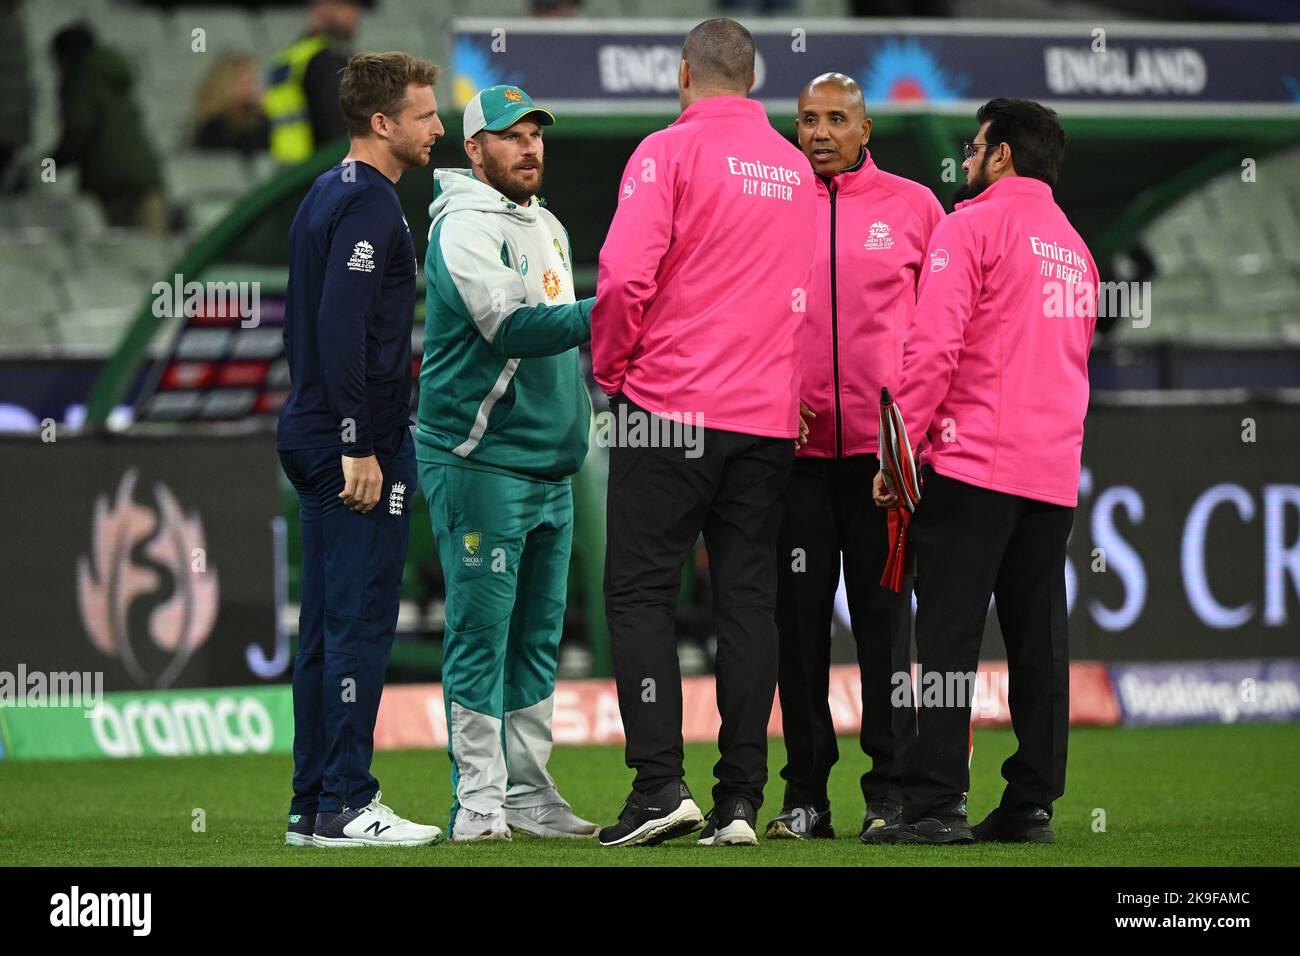 England's Jos Buttler (left) and Australia's Aaron Finch (second left) shake hands with match officials after the final pitch inspection of the T20 World Cup Super 12 match at Melbourne Cricket Ground in Melbourne, Australia. Picture date: Friday October 28, 2022. Stock Photo